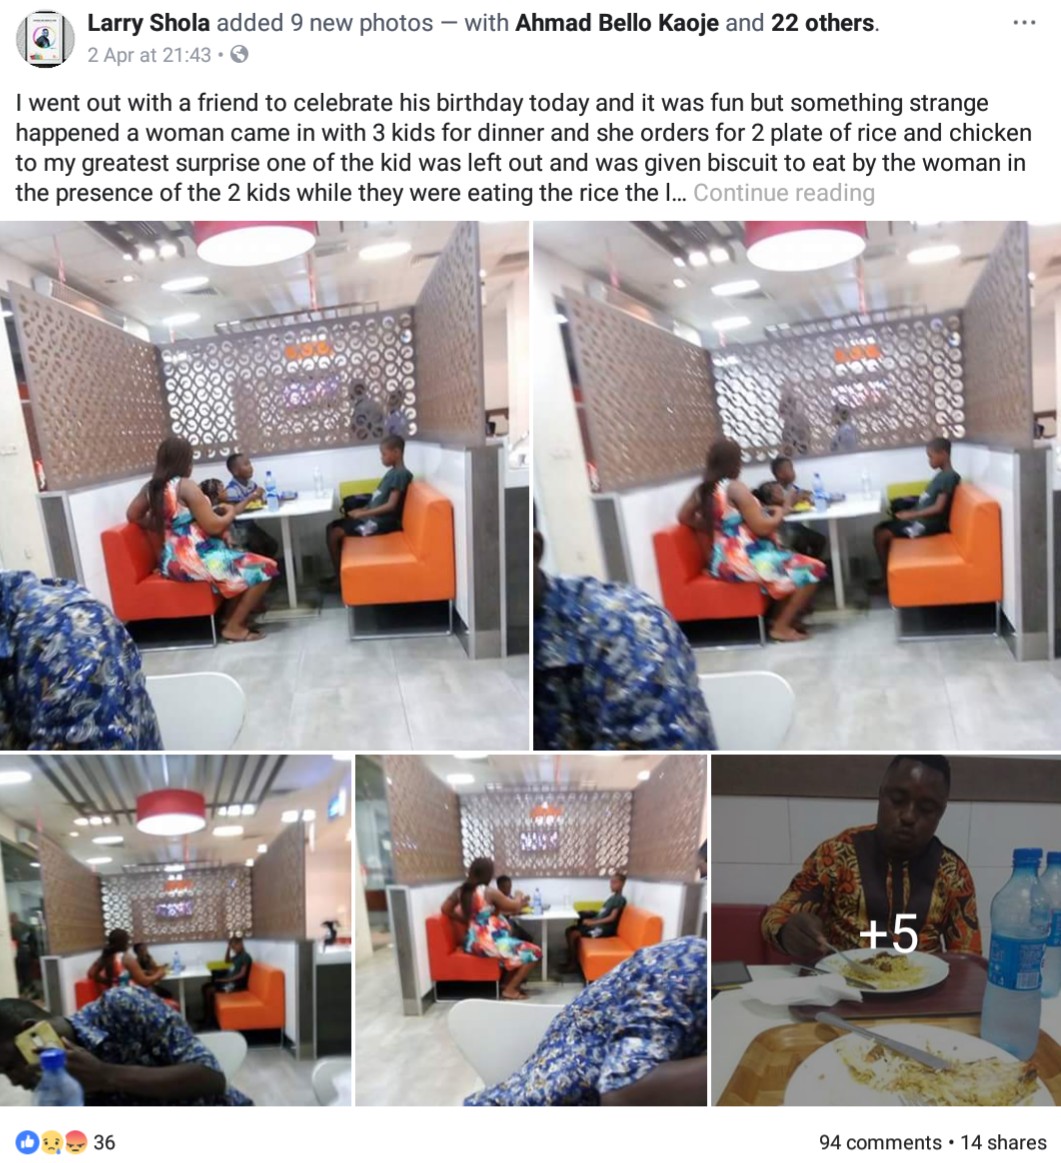 Nigerian Guy Narrates How Woman Ordered Mouth-Watering Dinner For Kids But Left Maid With Biscuit (2)